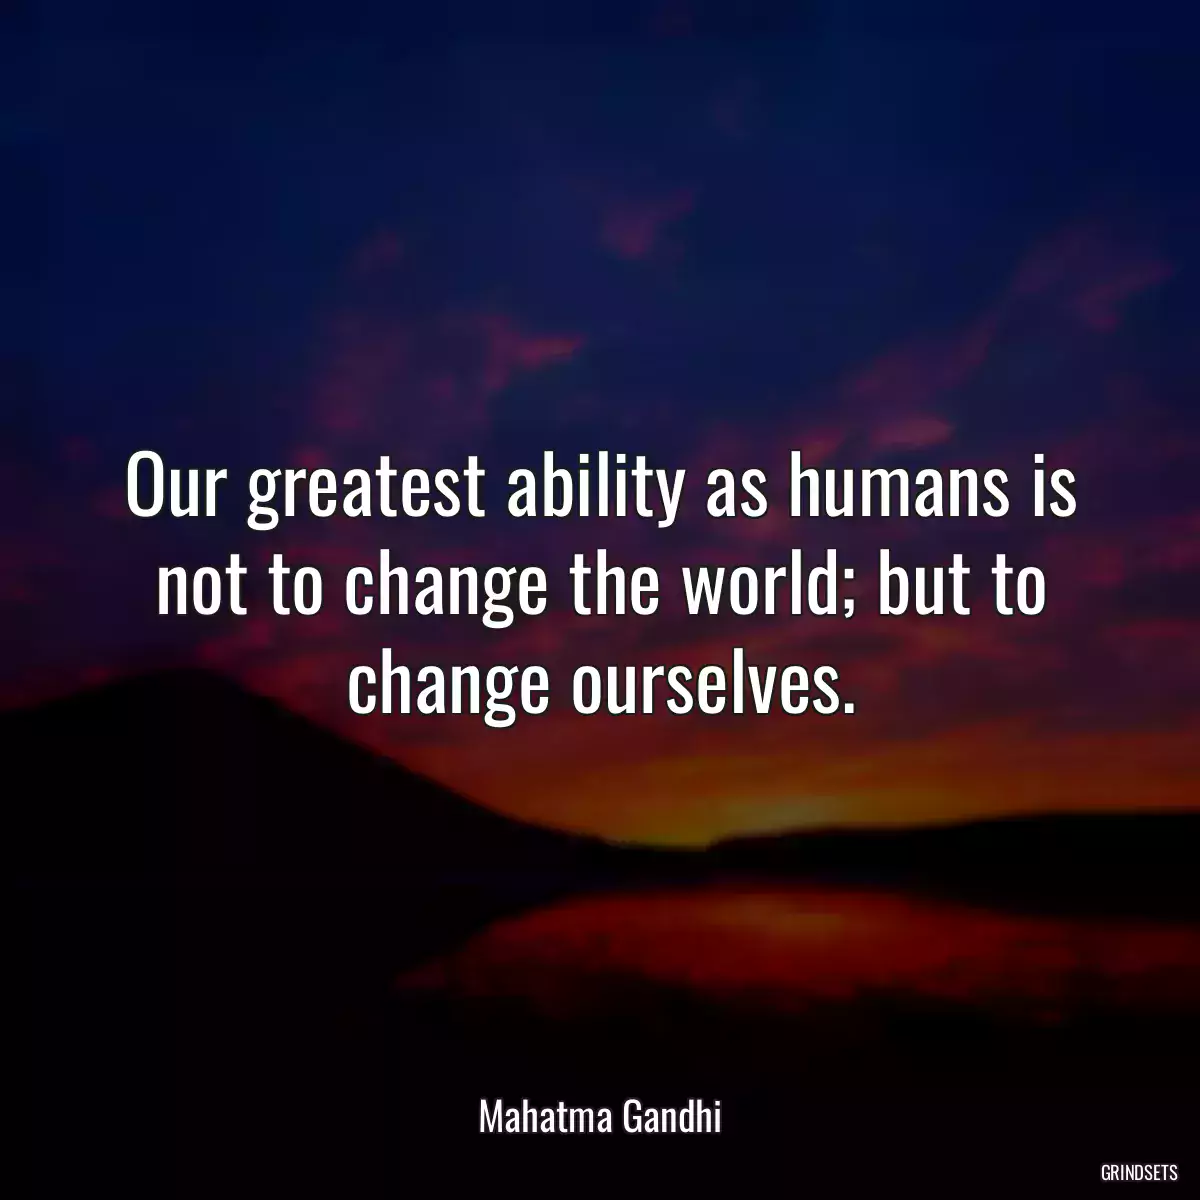 Our greatest ability as humans is not to change the world; but to change ourselves.